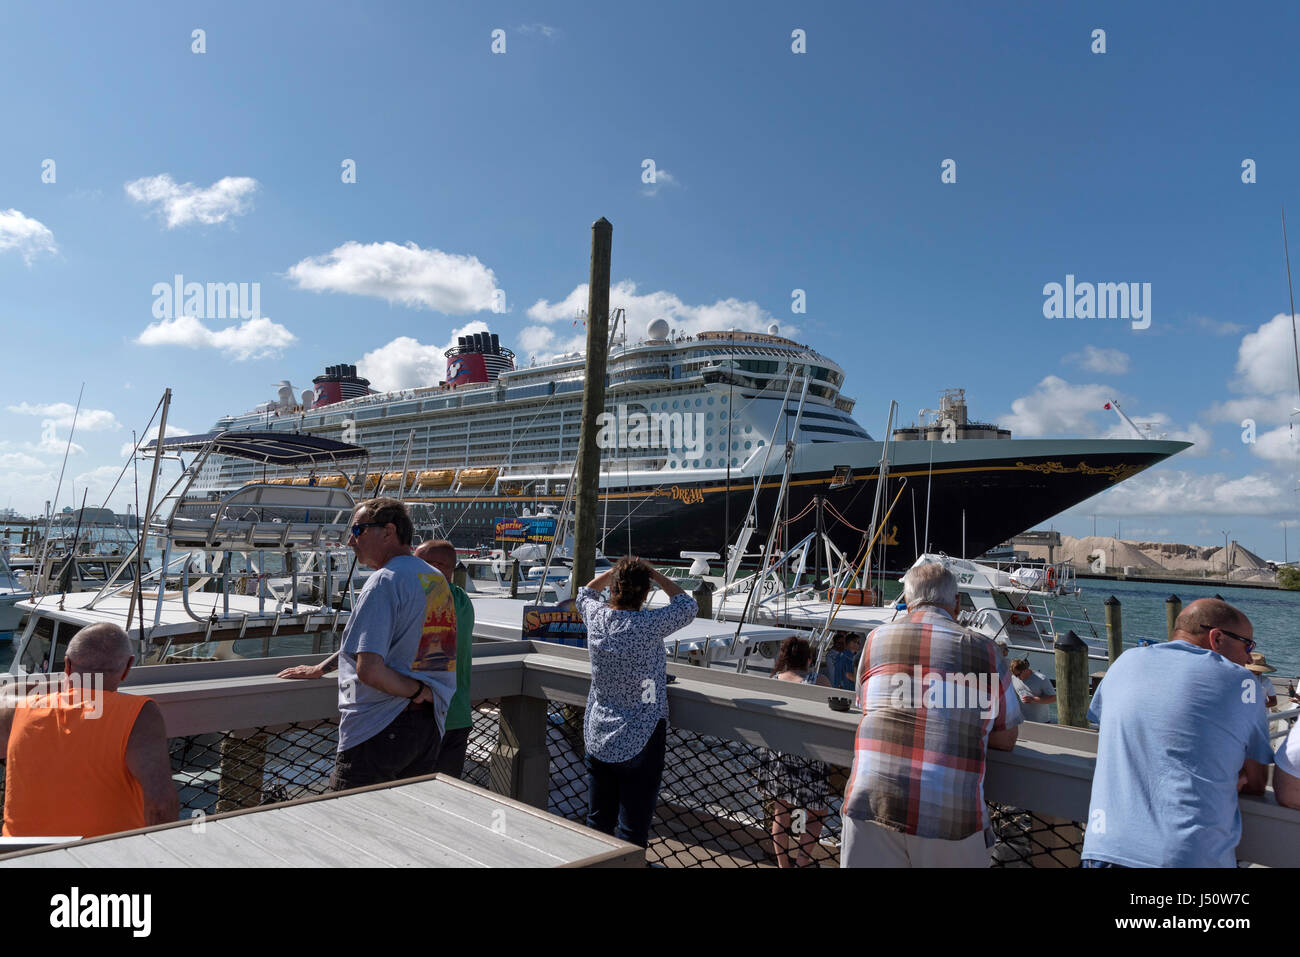 Holidaymakers watch as the Disney Dream cruise ship departing Port canaveral Florida USA. April 2017 Stock Photo